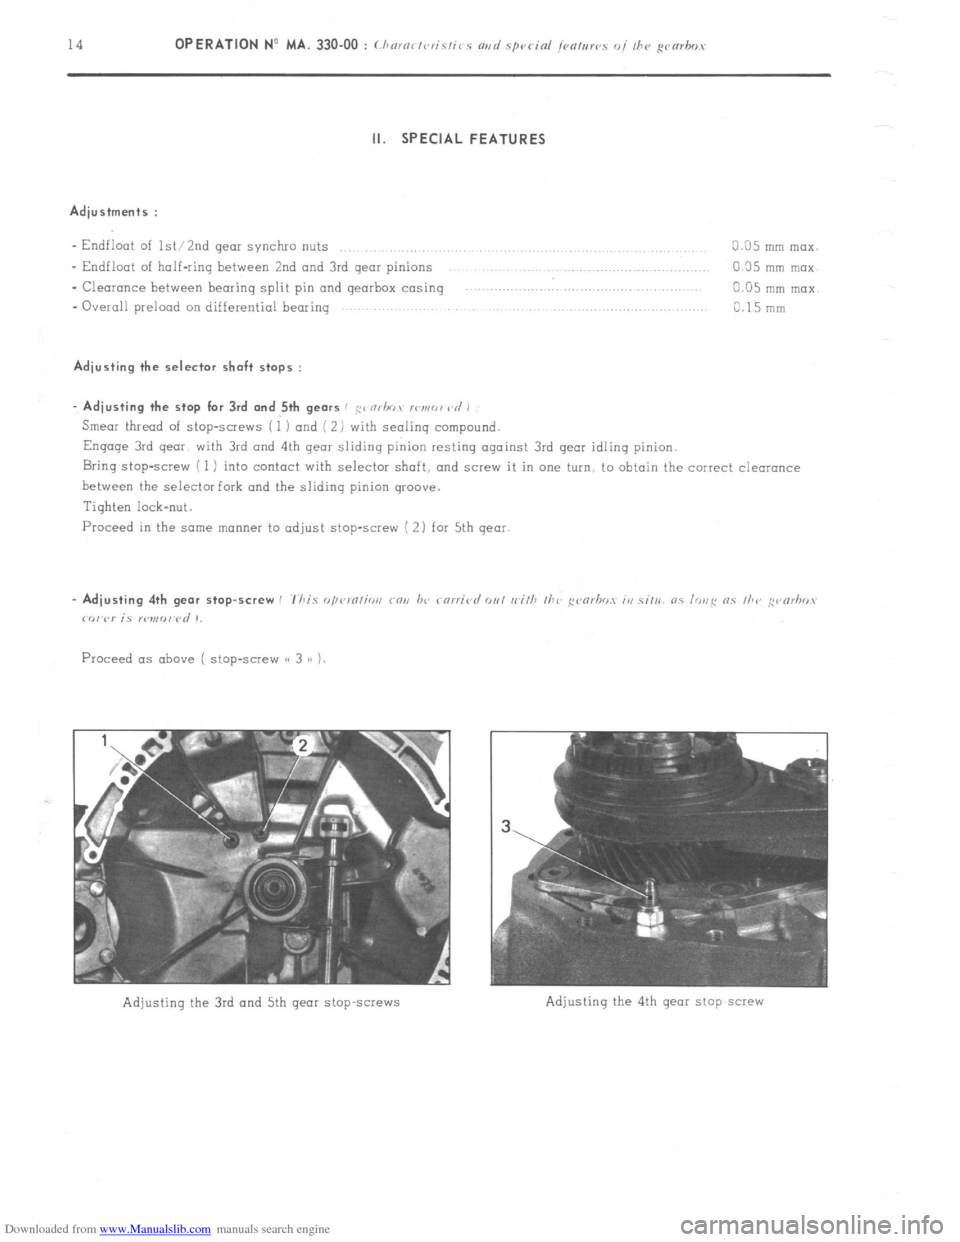 Citroen CX 1981 1.G Workshop Manual Downloaded from www.Manualslib.com manuals search engine ii. SPECIAL FEATURES 
Adjustments : 
- Endfloat of lW2nd gear synchio nuts 
0.05 mm max. 
- Endfloot of half-ring between 2nd and 3rd gear pini